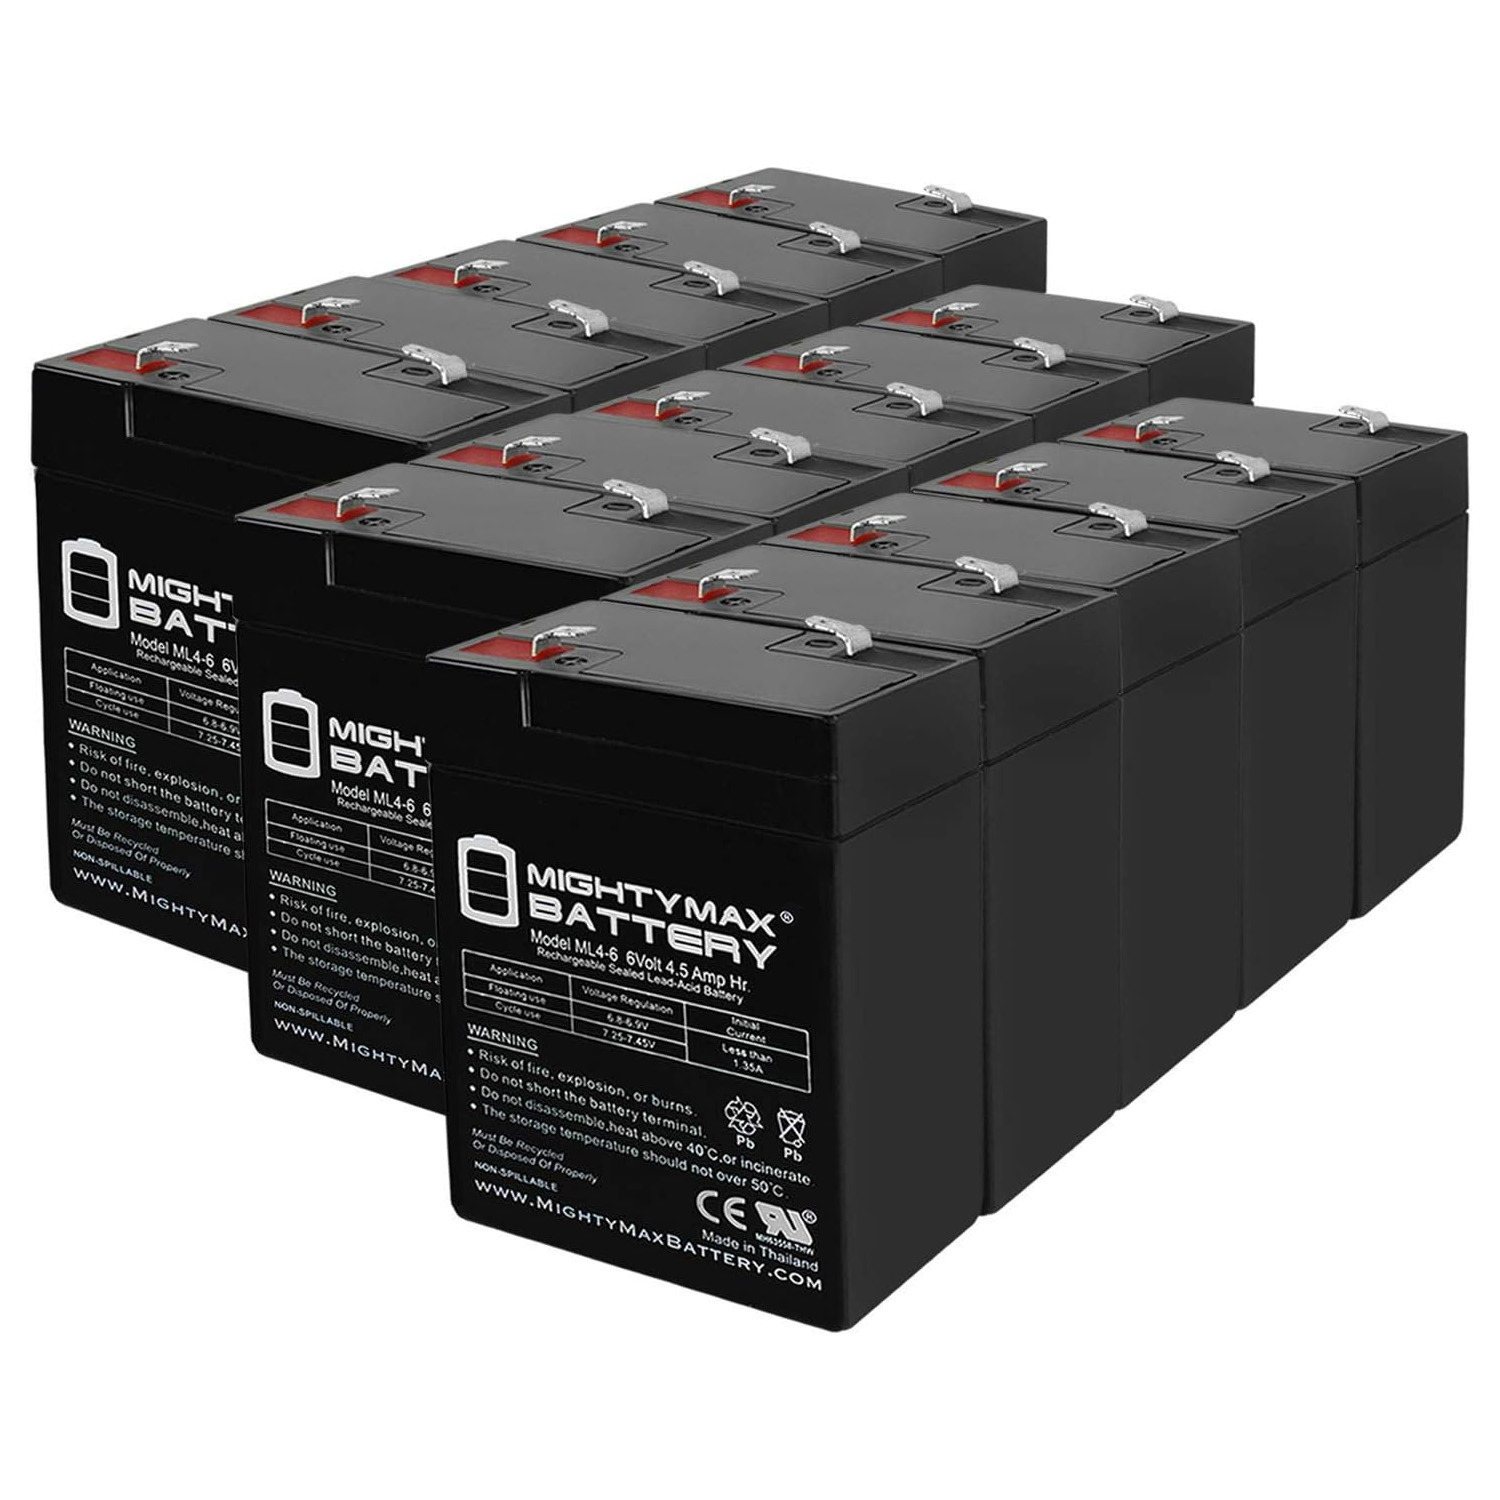 6V 4.5AH Replacement Battery for Sho-Me 09.0985 - 15 Pack